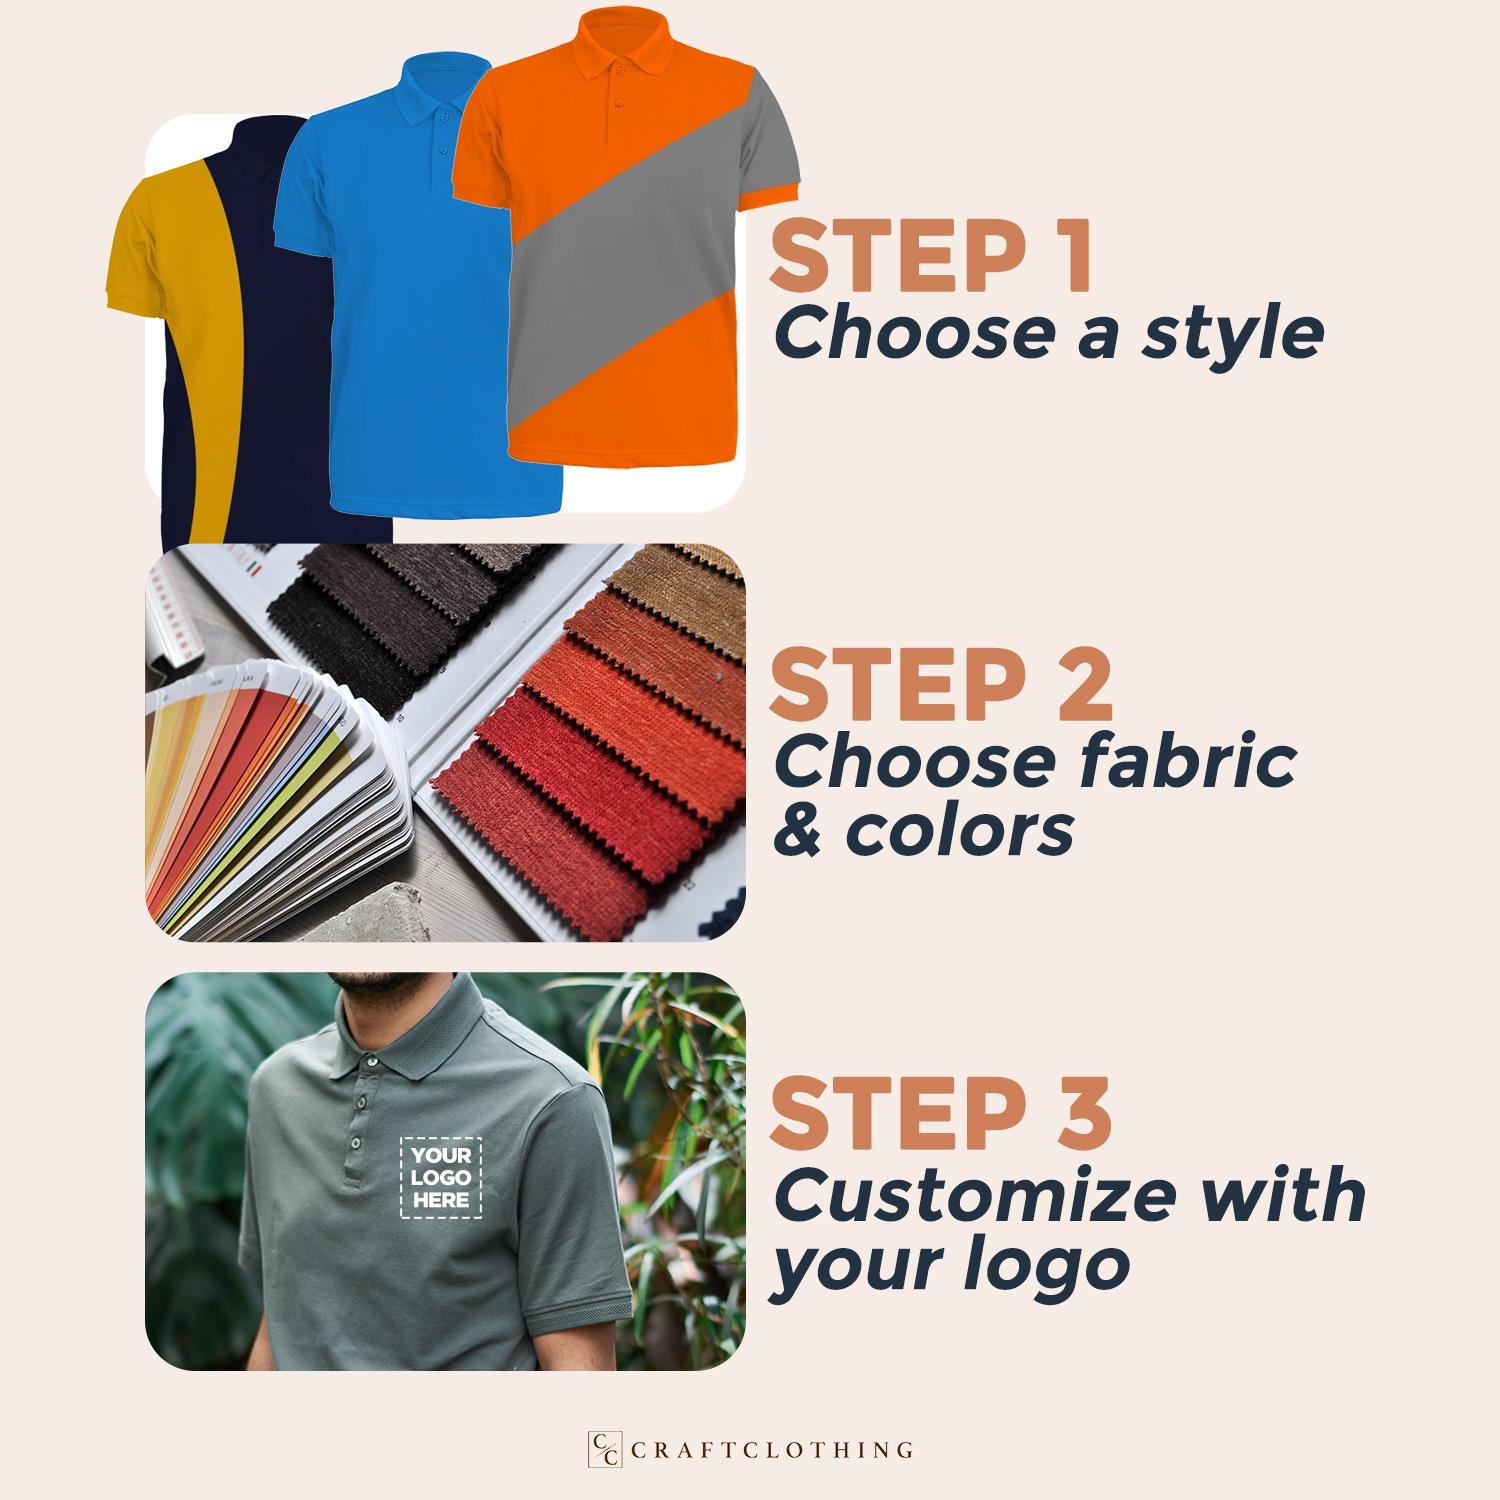 Visualize your own customized item in 3 easy steps.